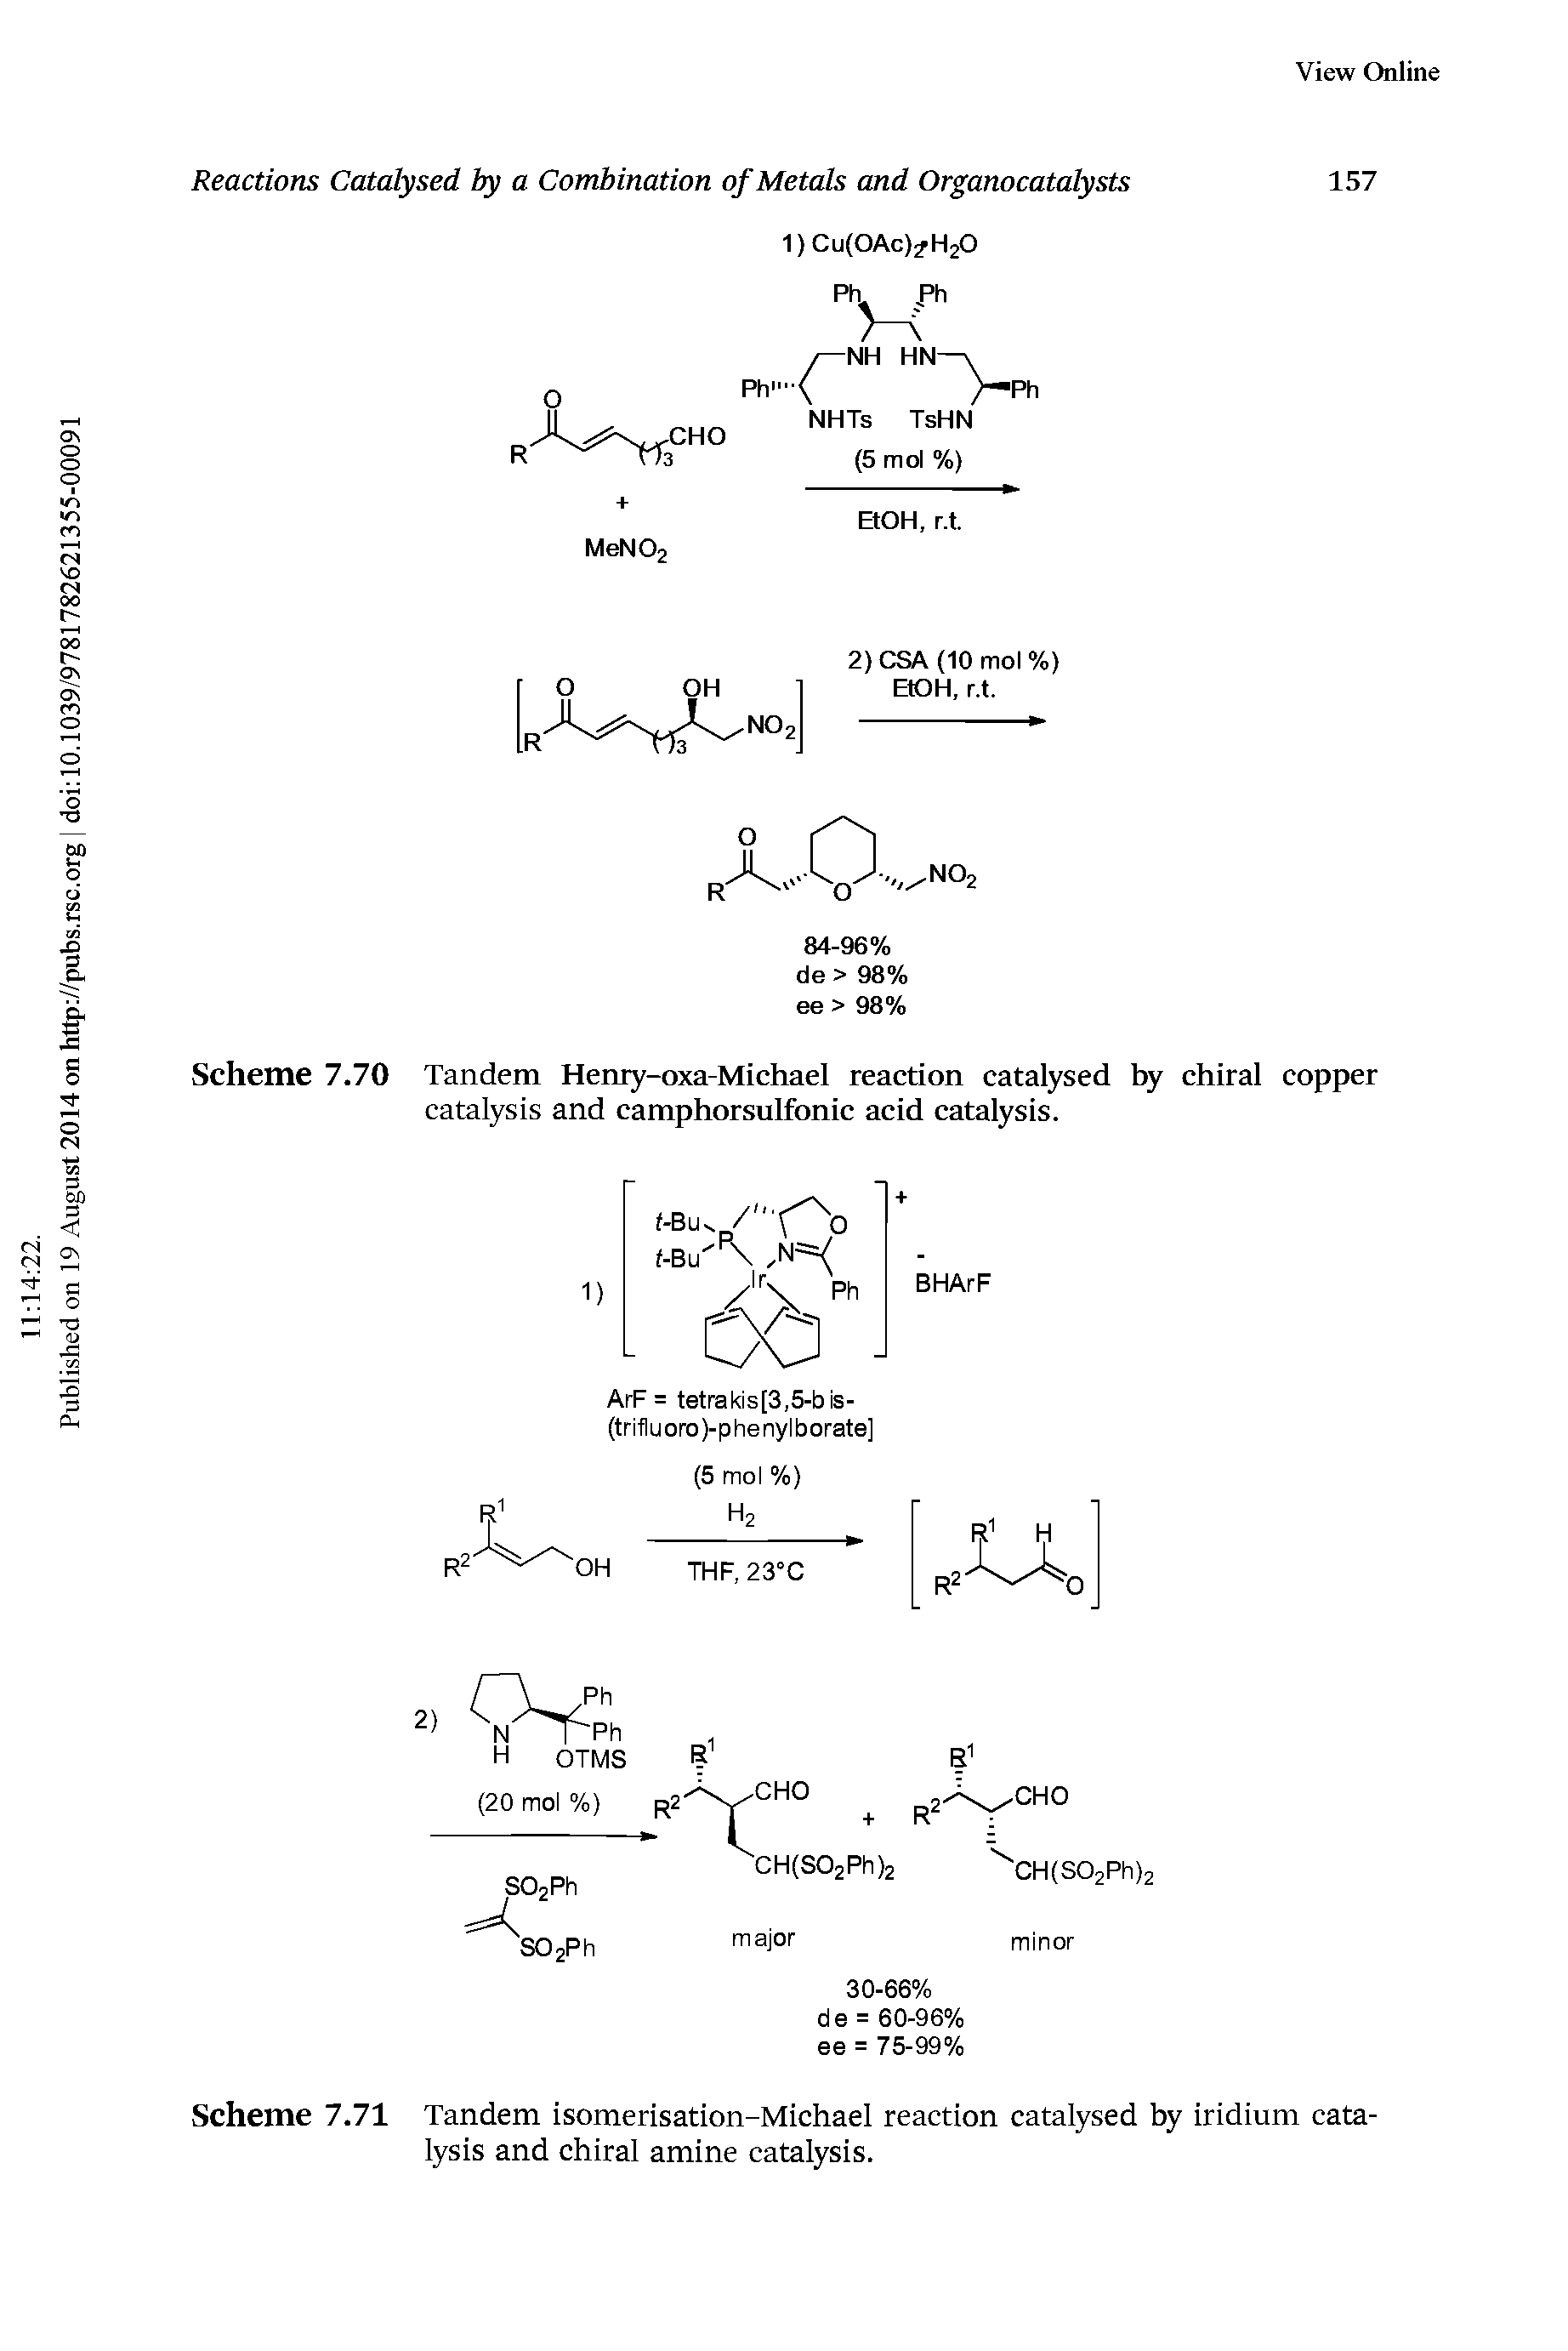 Scheme 7.70 Tandem Henry-oxa-Michael reaction catalysed 1 chiral copper catalysis and camphorsulfonic acid catalysis.